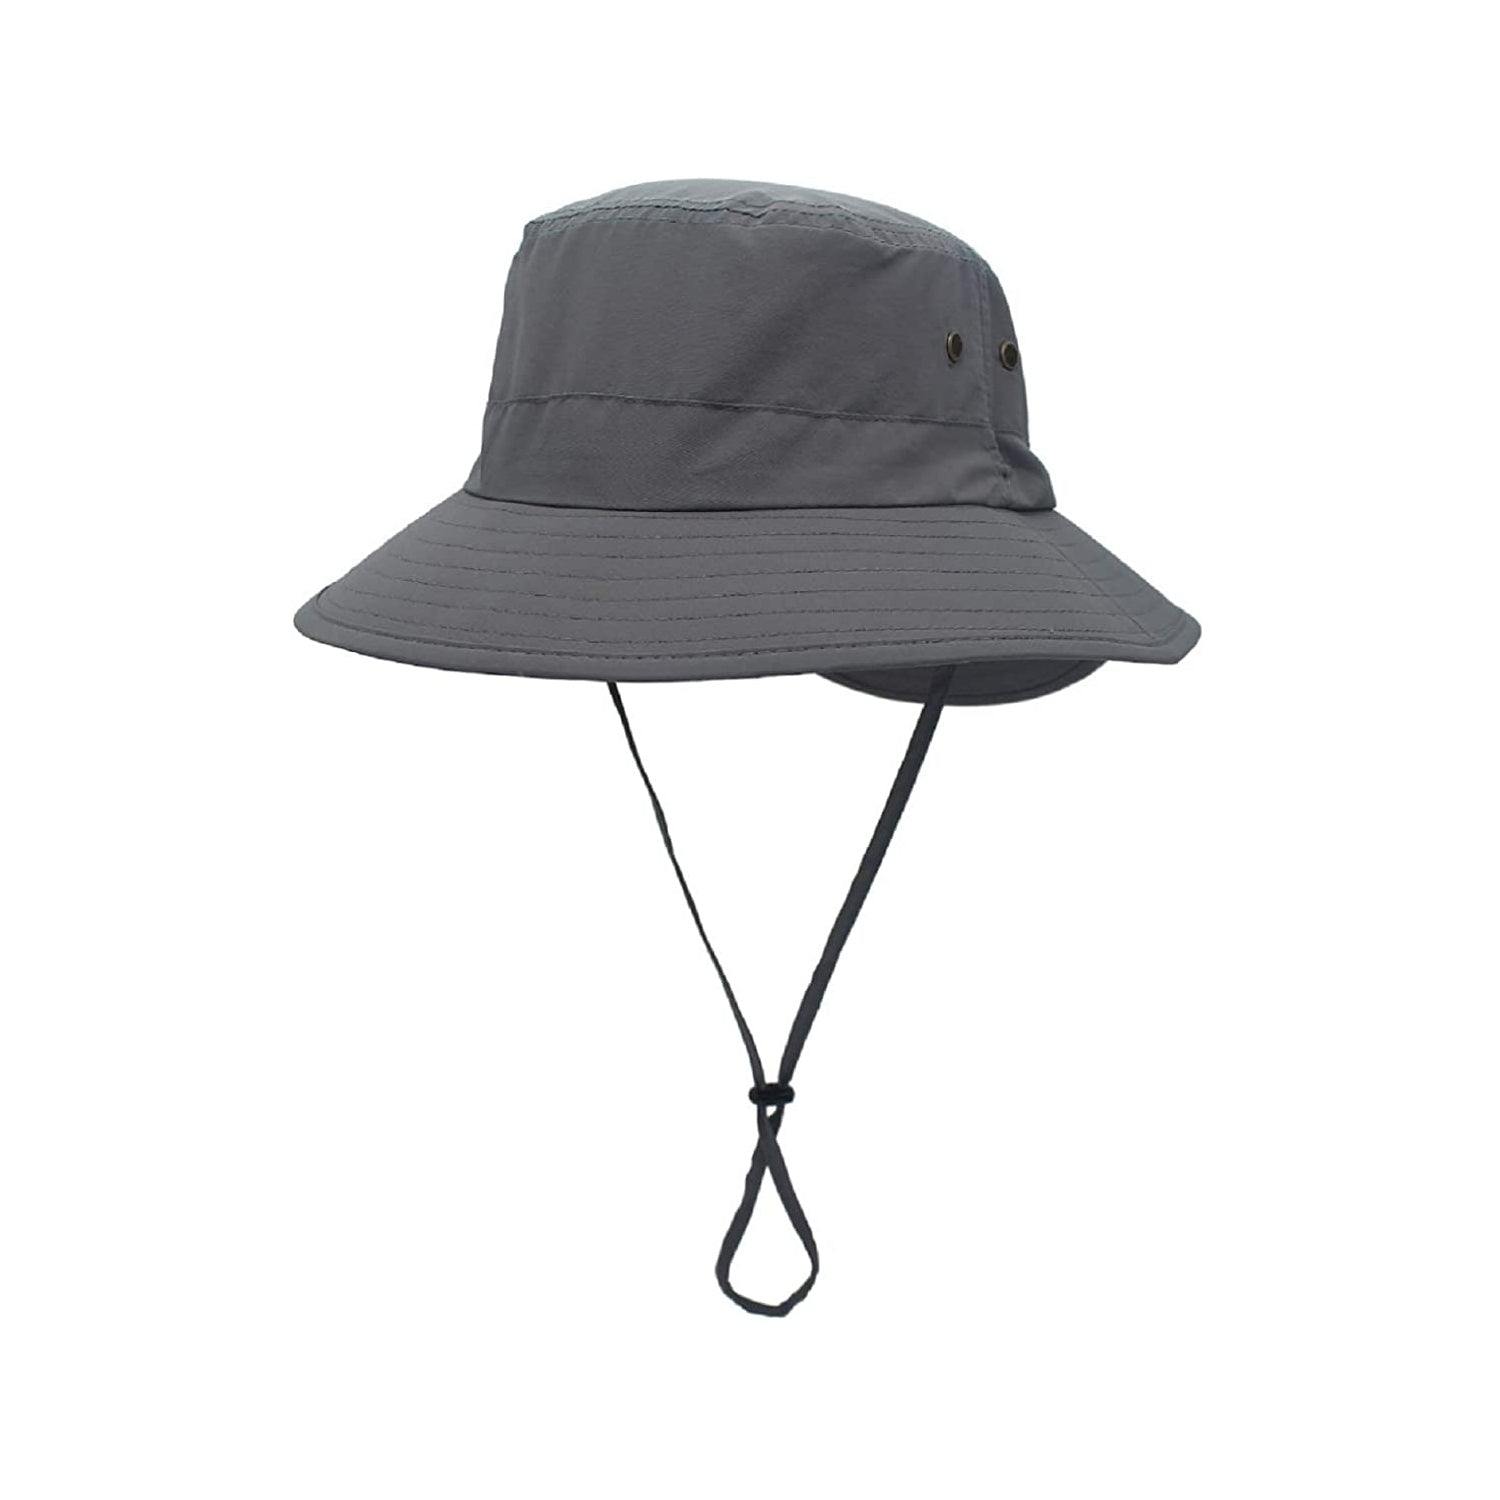 TOPONE ACCESSORIES LIMITED Custom Lightweight Safari Quick Dry Fishing Hat with Strap Cool Bucket Topone Accessories Ltd. 